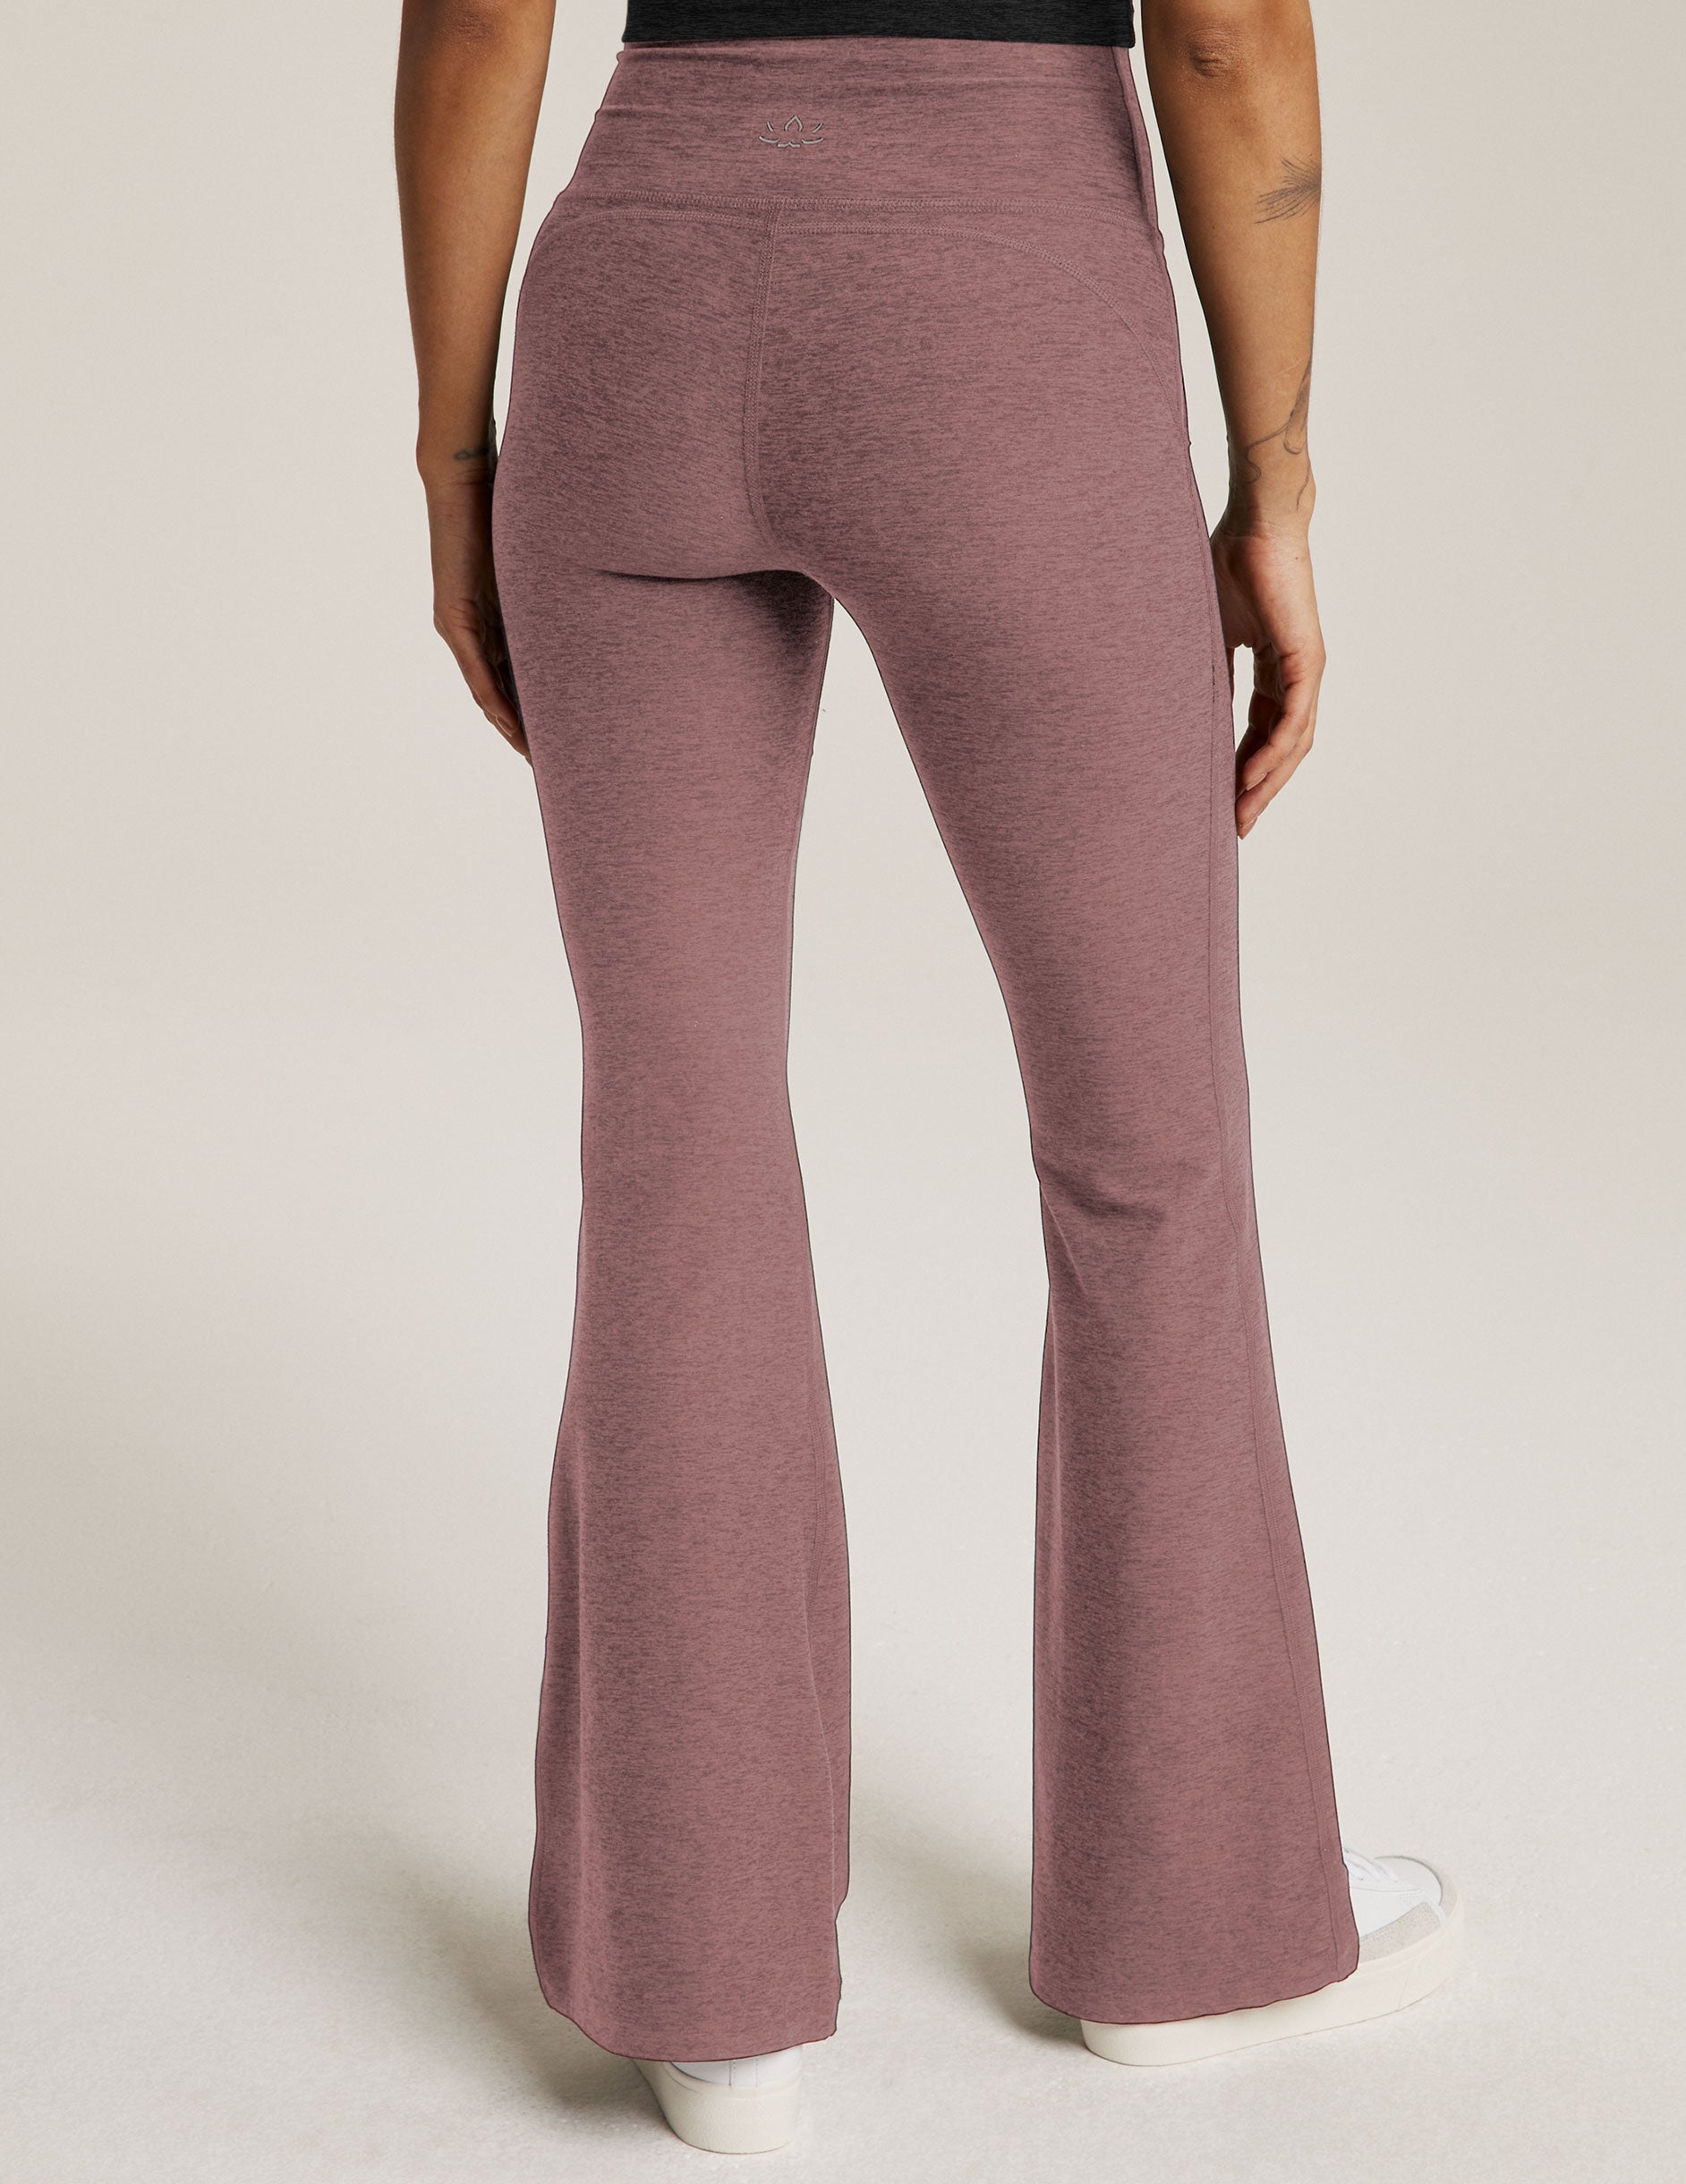 brown flare pant with pocket detail